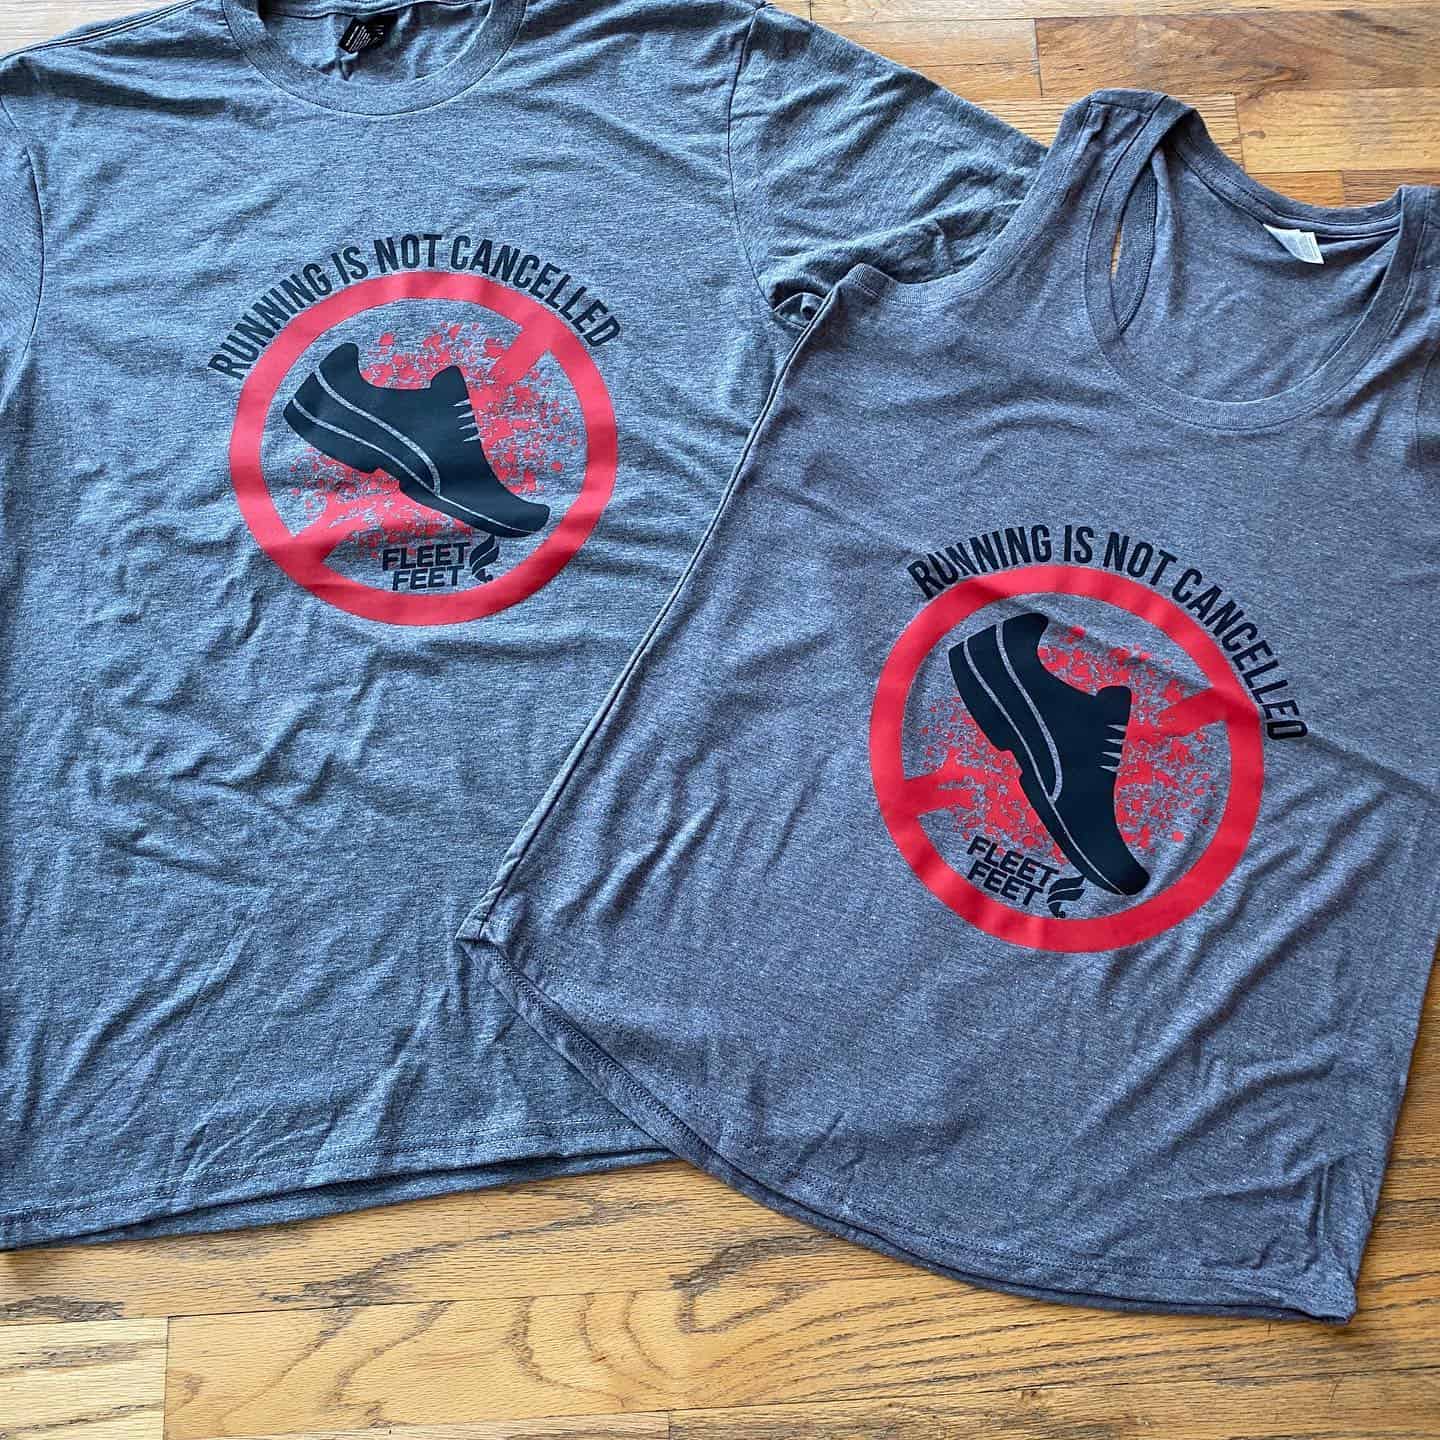 Two t-shirts that say "running is not cancelled" with a shoe crossed out underneath